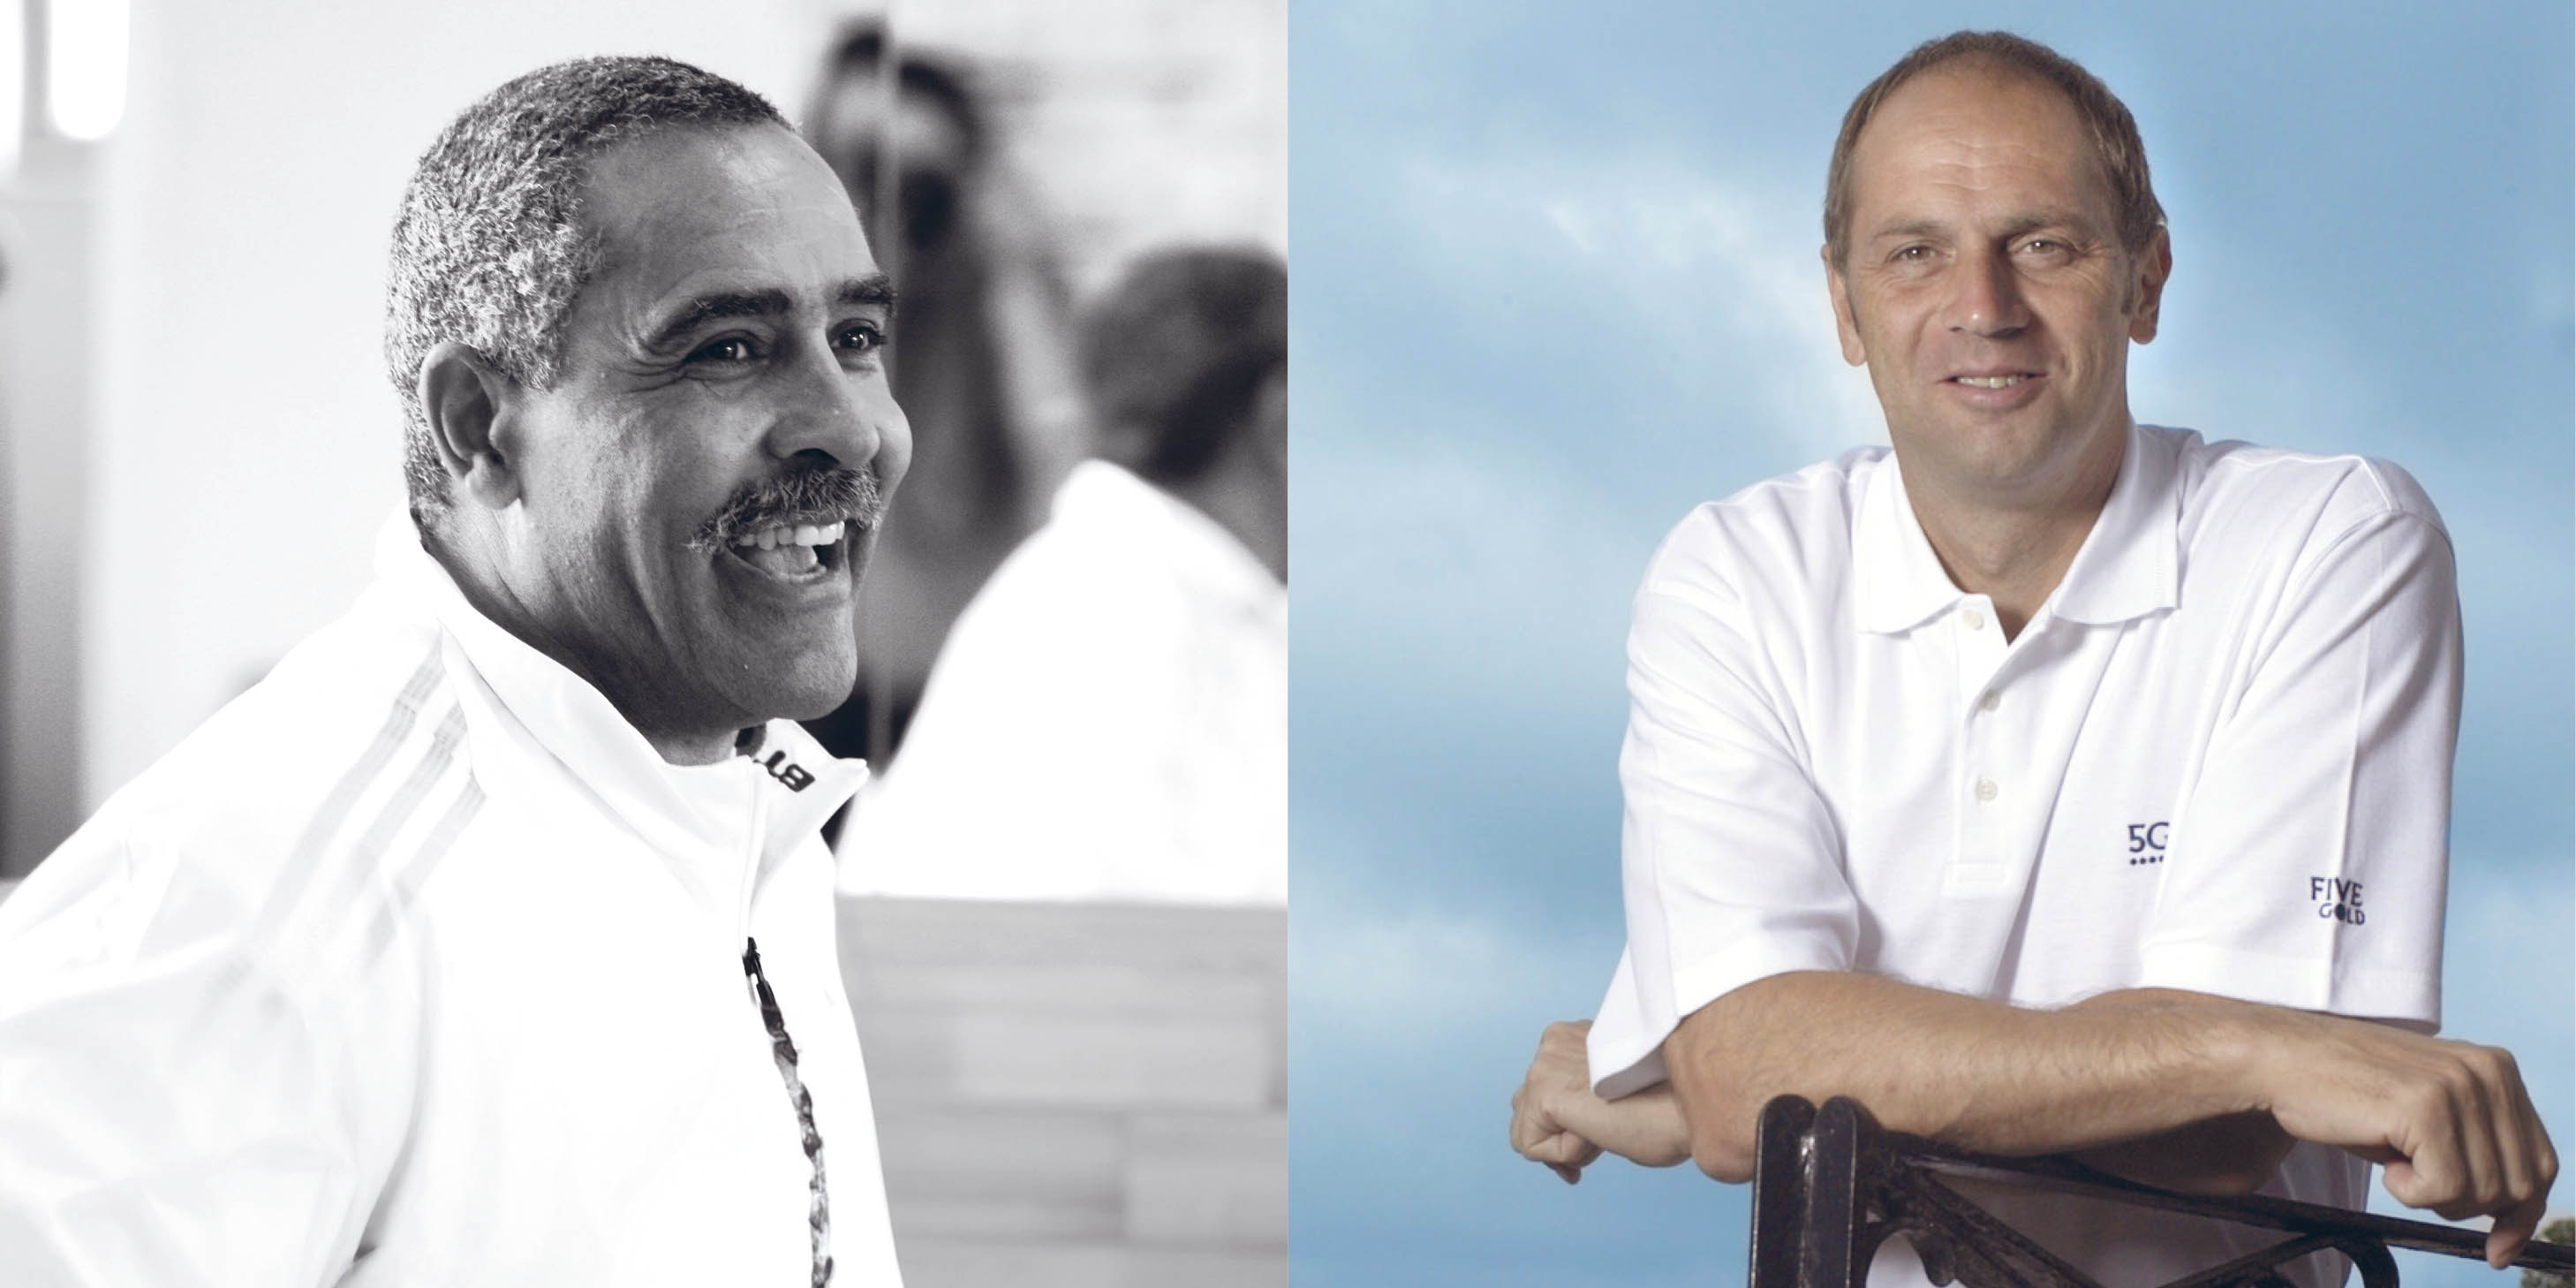 Headshots of Olympic champions, Sir Steve Redgrave and Daley Thompson